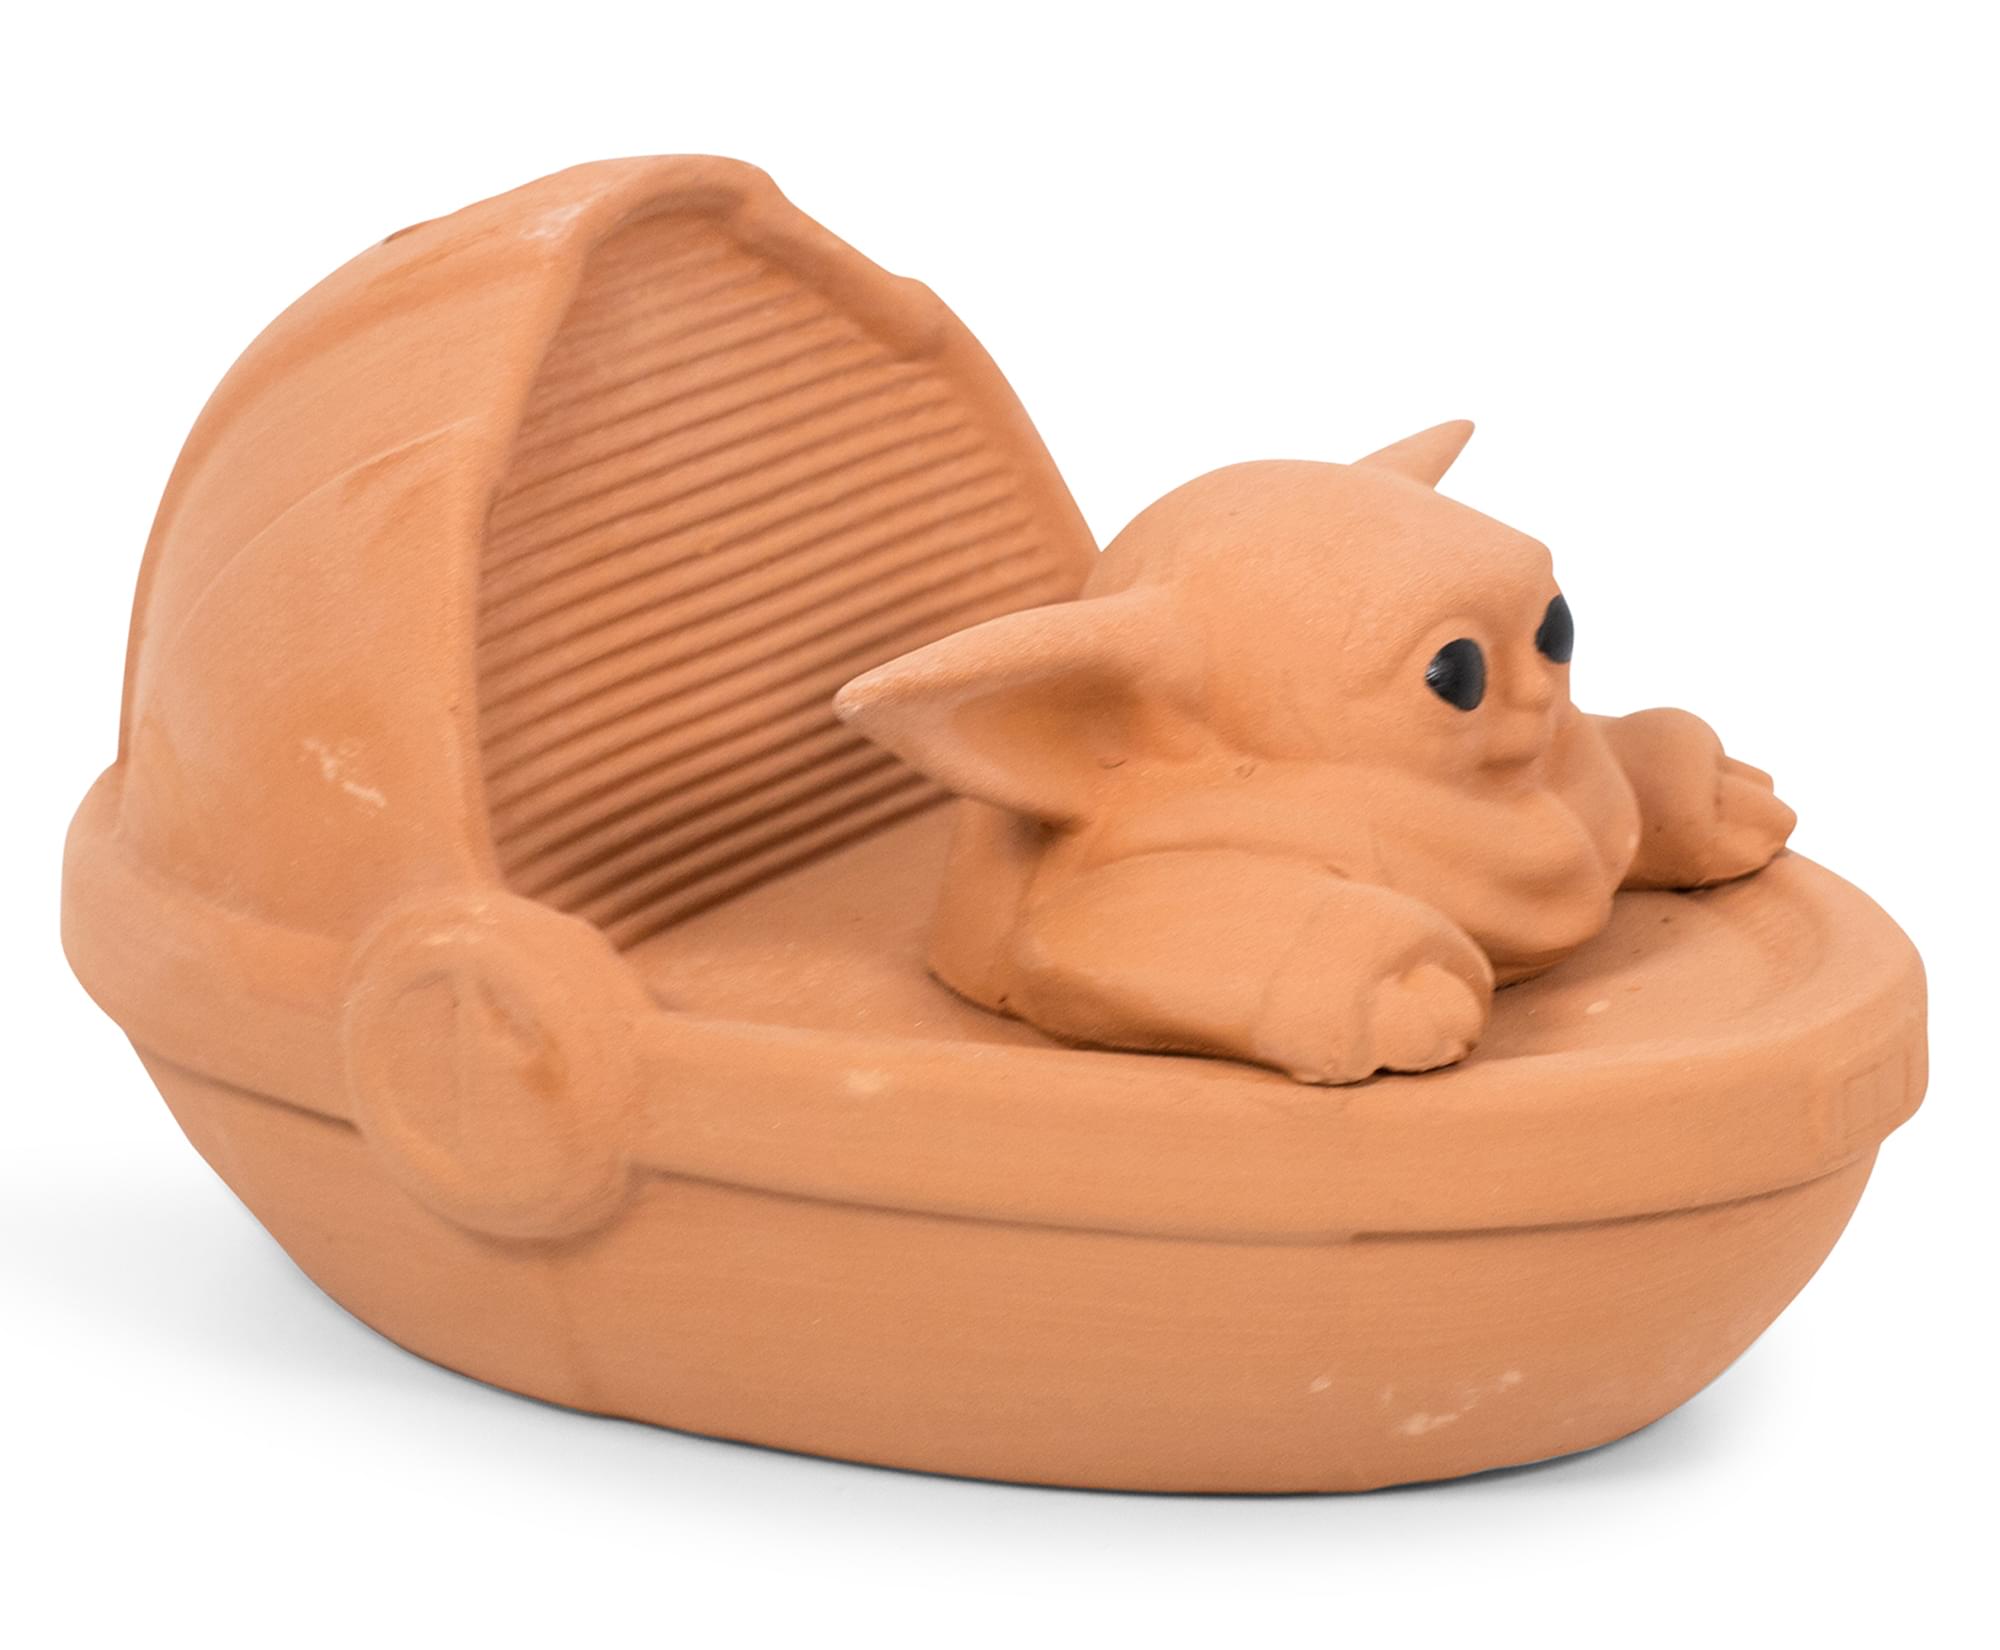 Chia -Pet Planter Decorat Pottery Sunlight Fast-Growing Seed Pack- Star Wars Yoda the Child- Orange - image 2 of 7